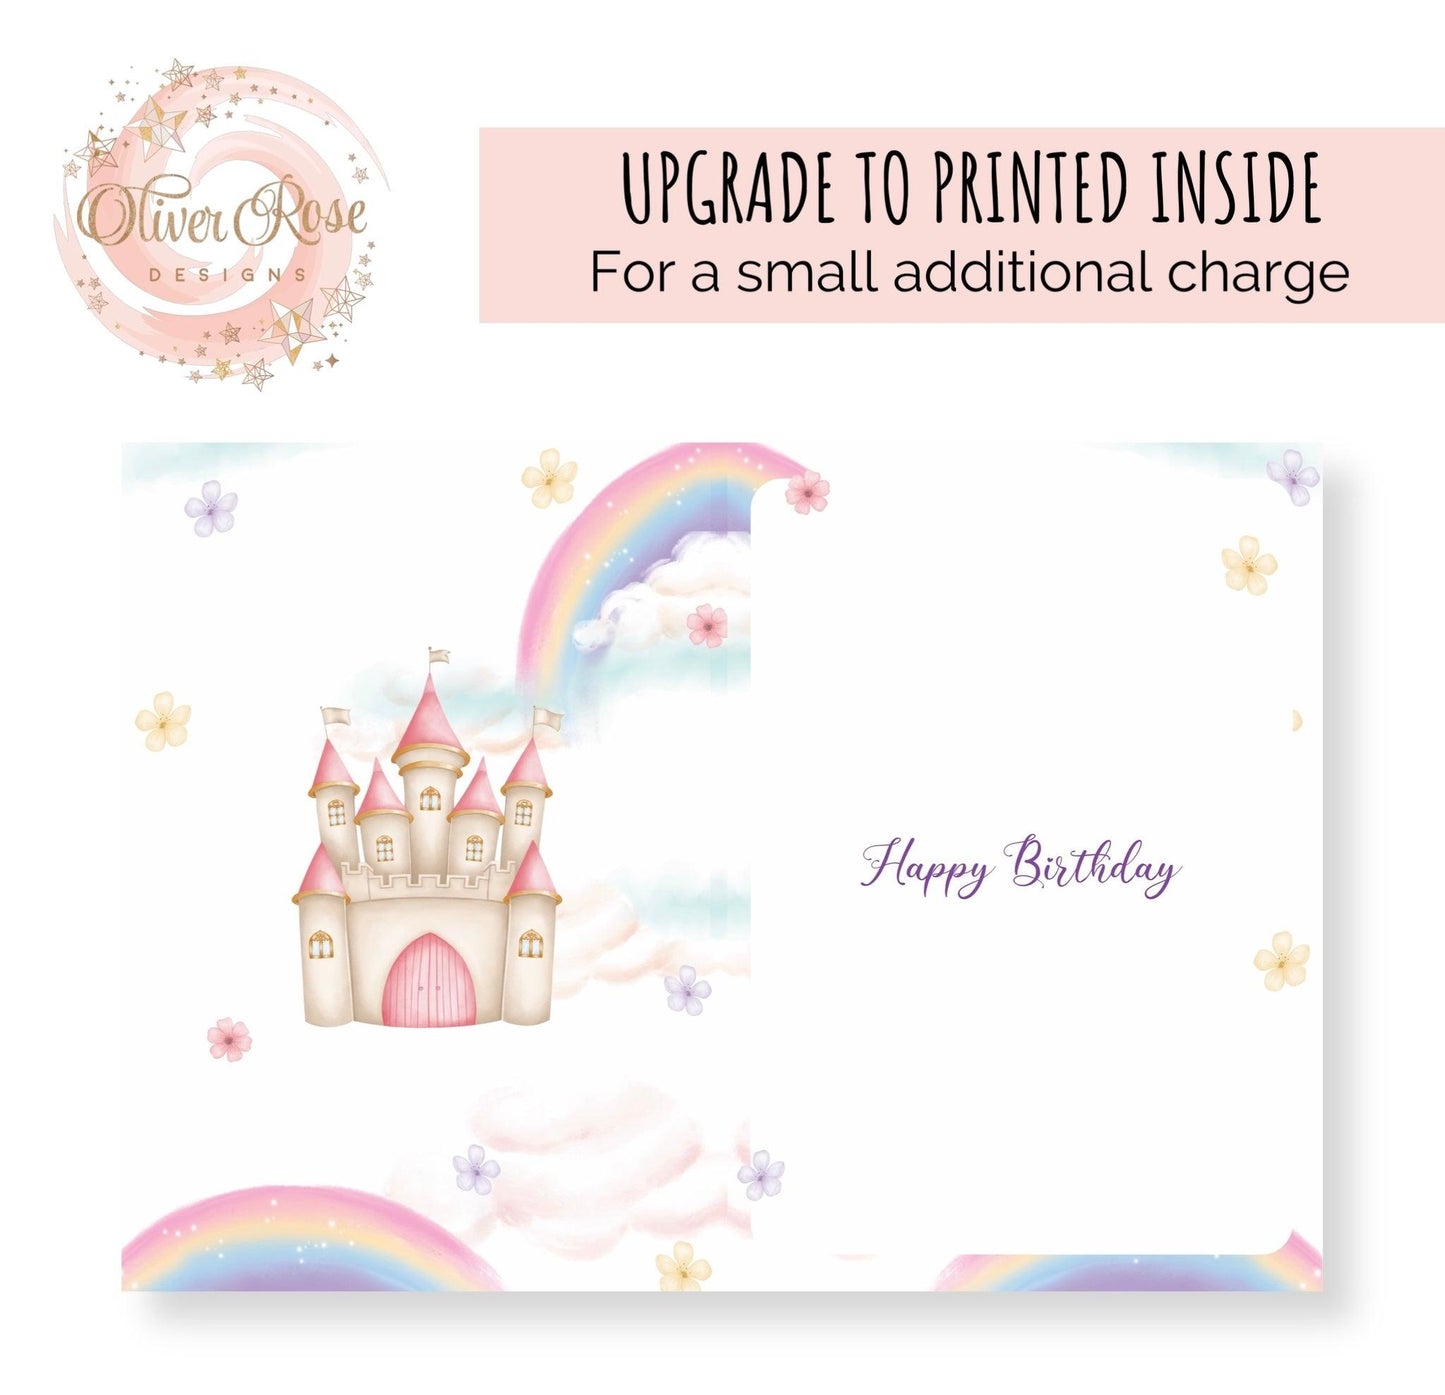 Princess Carriage Happy Birthday, PRINTED INSIDE UPGRADE | Oliver Rose Designs